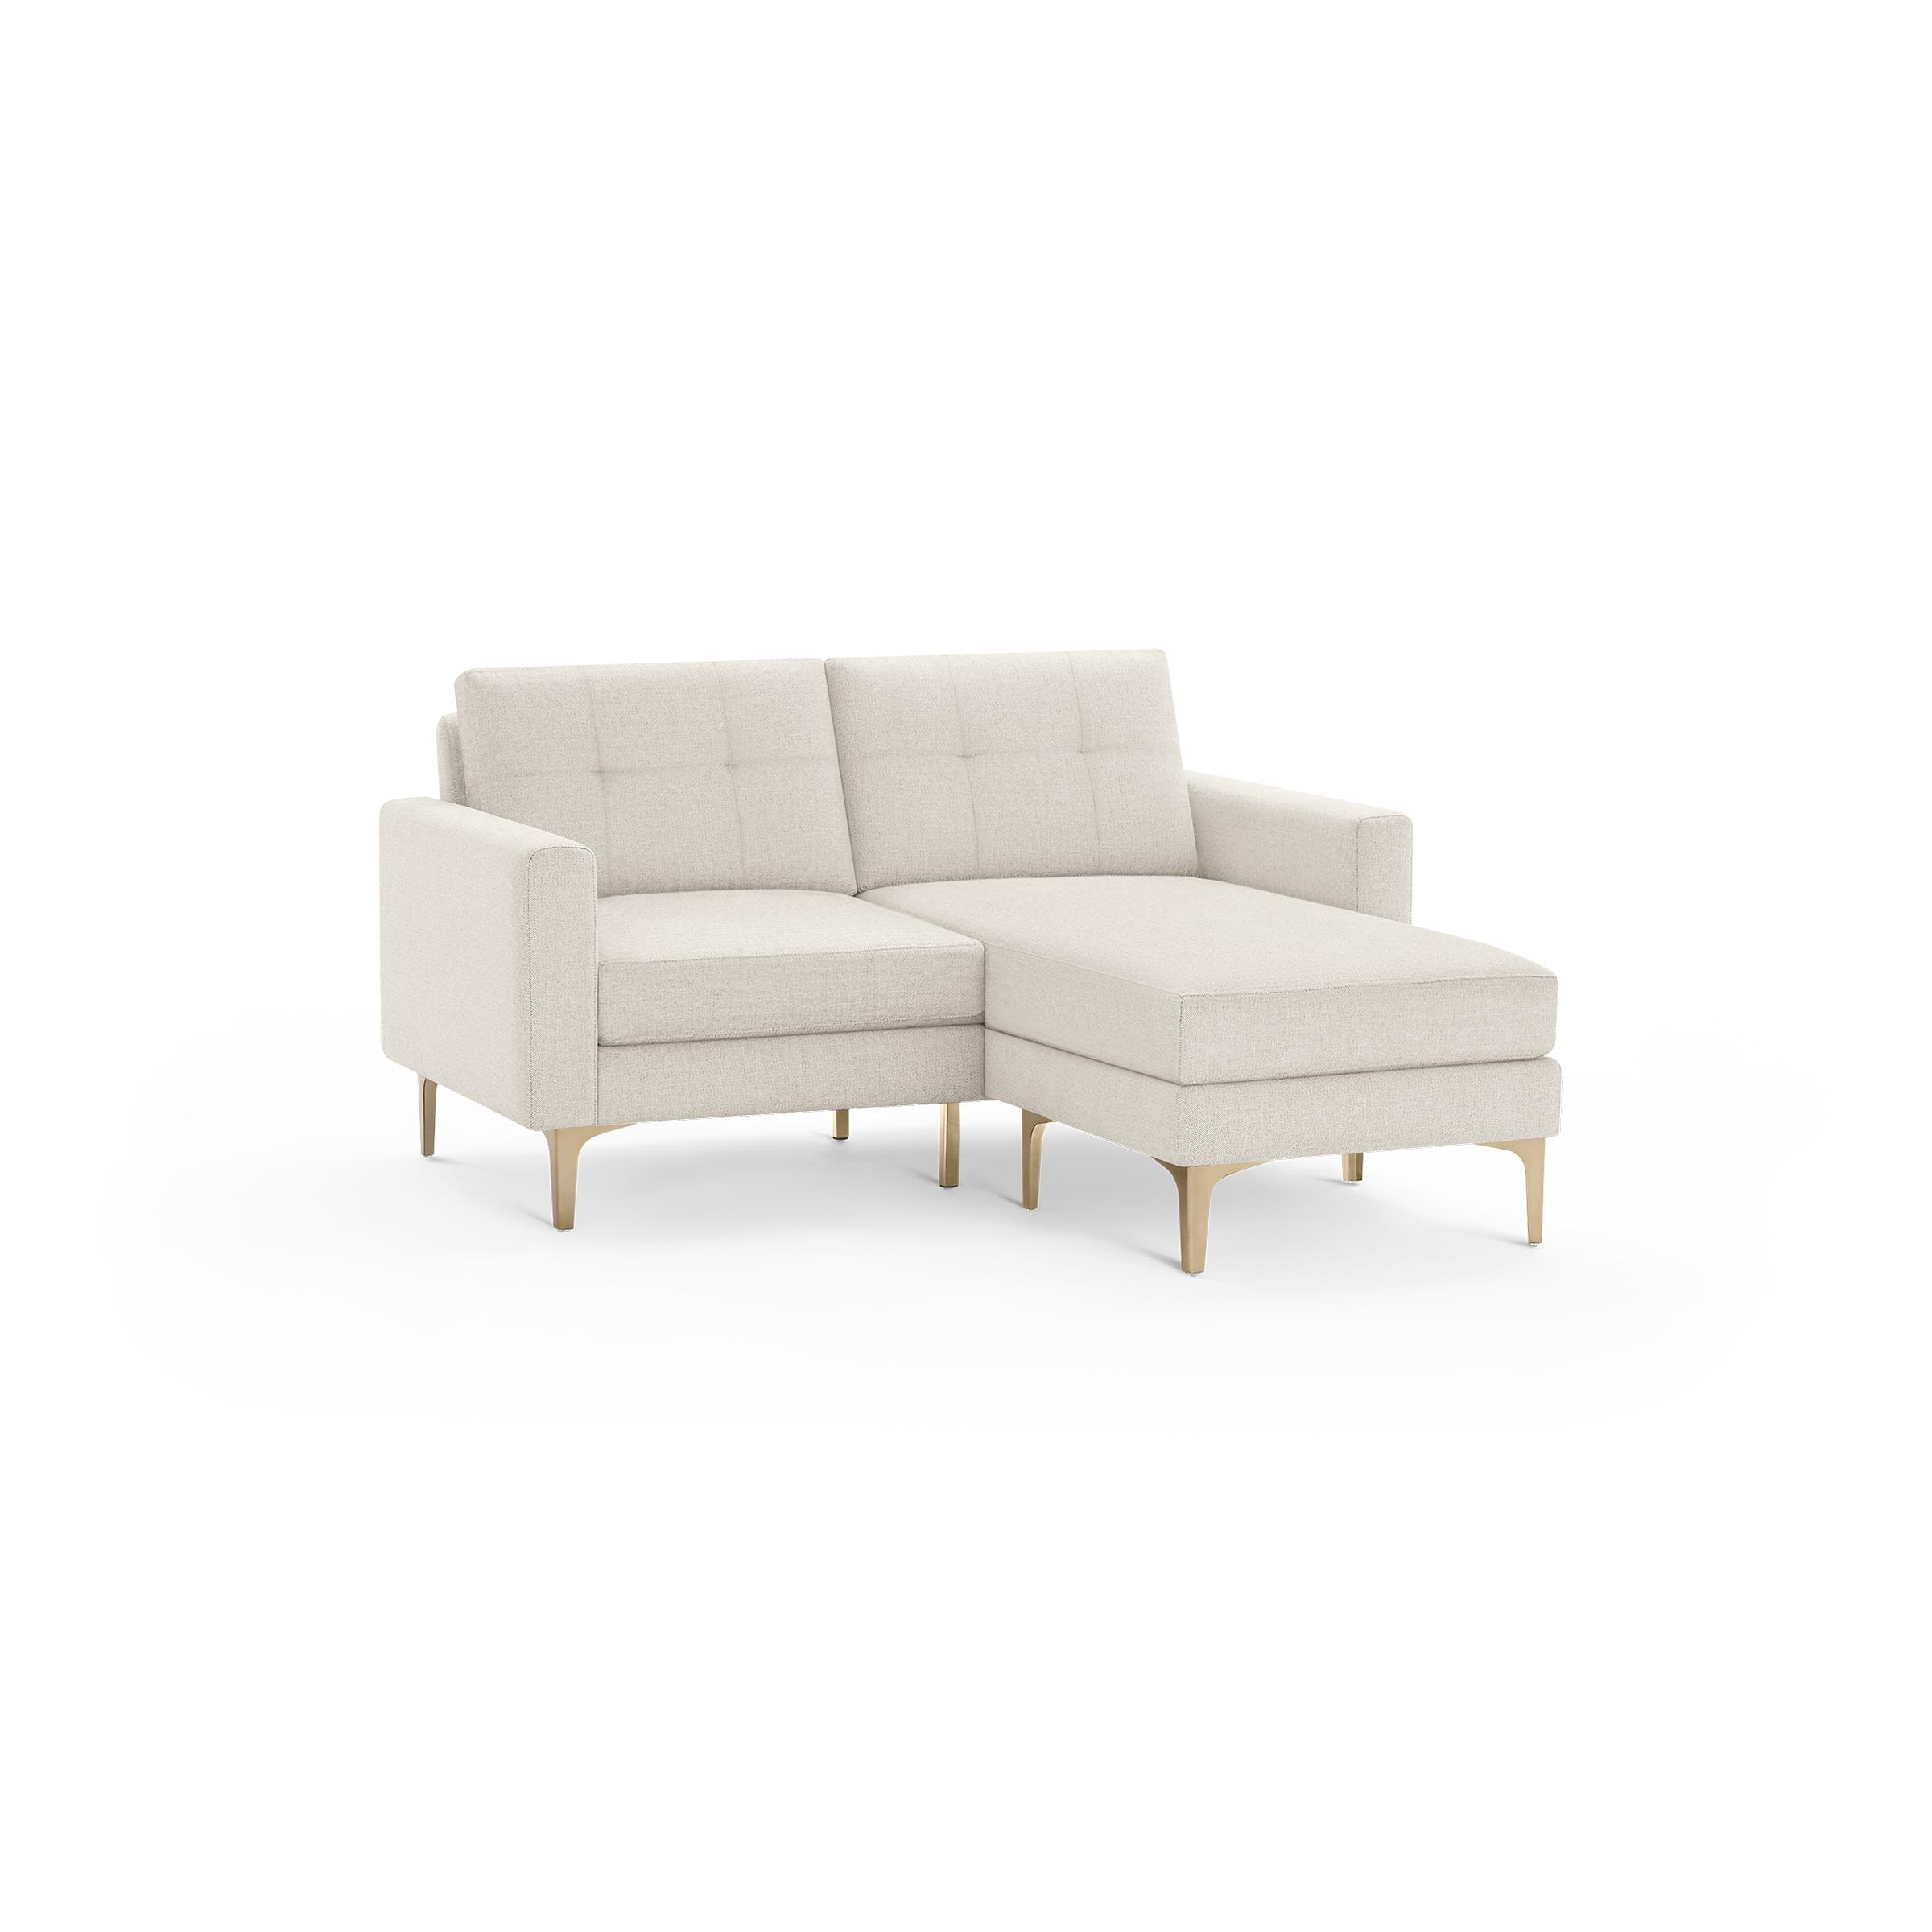 Nomad Loveseat with Chaise in Ivory, Brass Legs - Image 0